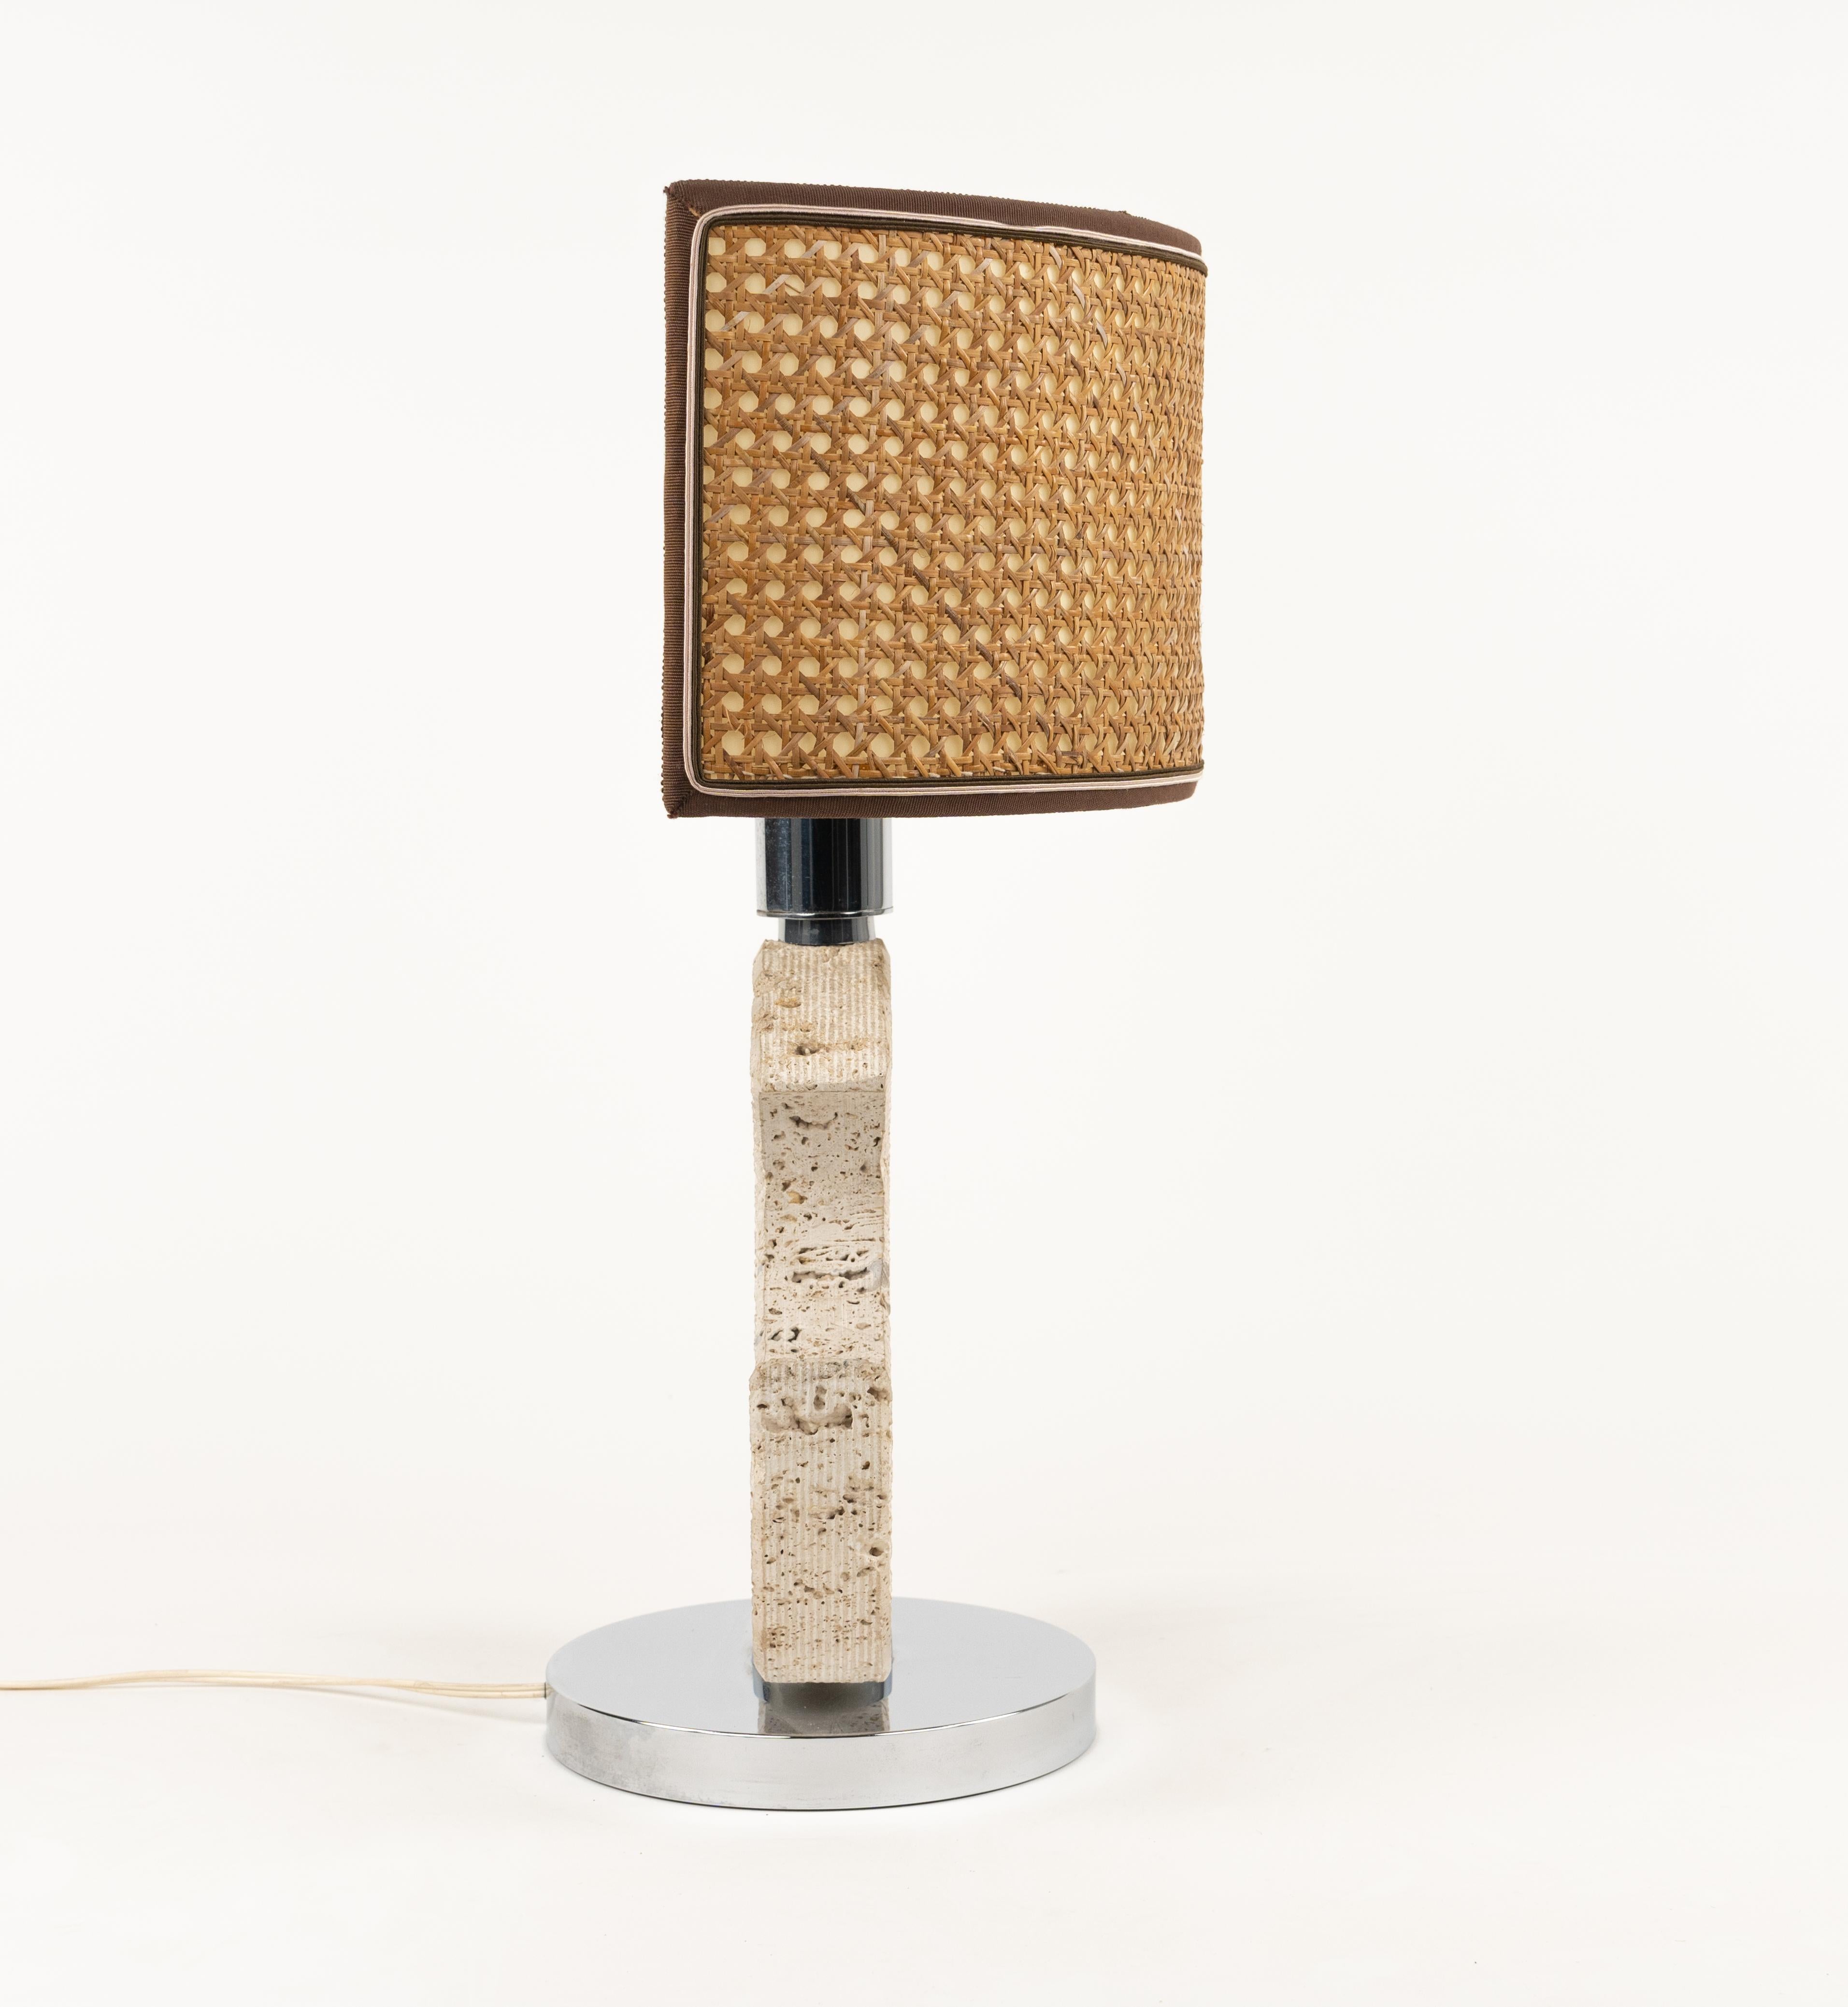 Italian Midcentury Table Lamp in Travertine and Chrome by Studio CE. VA. Italy 1970s For Sale